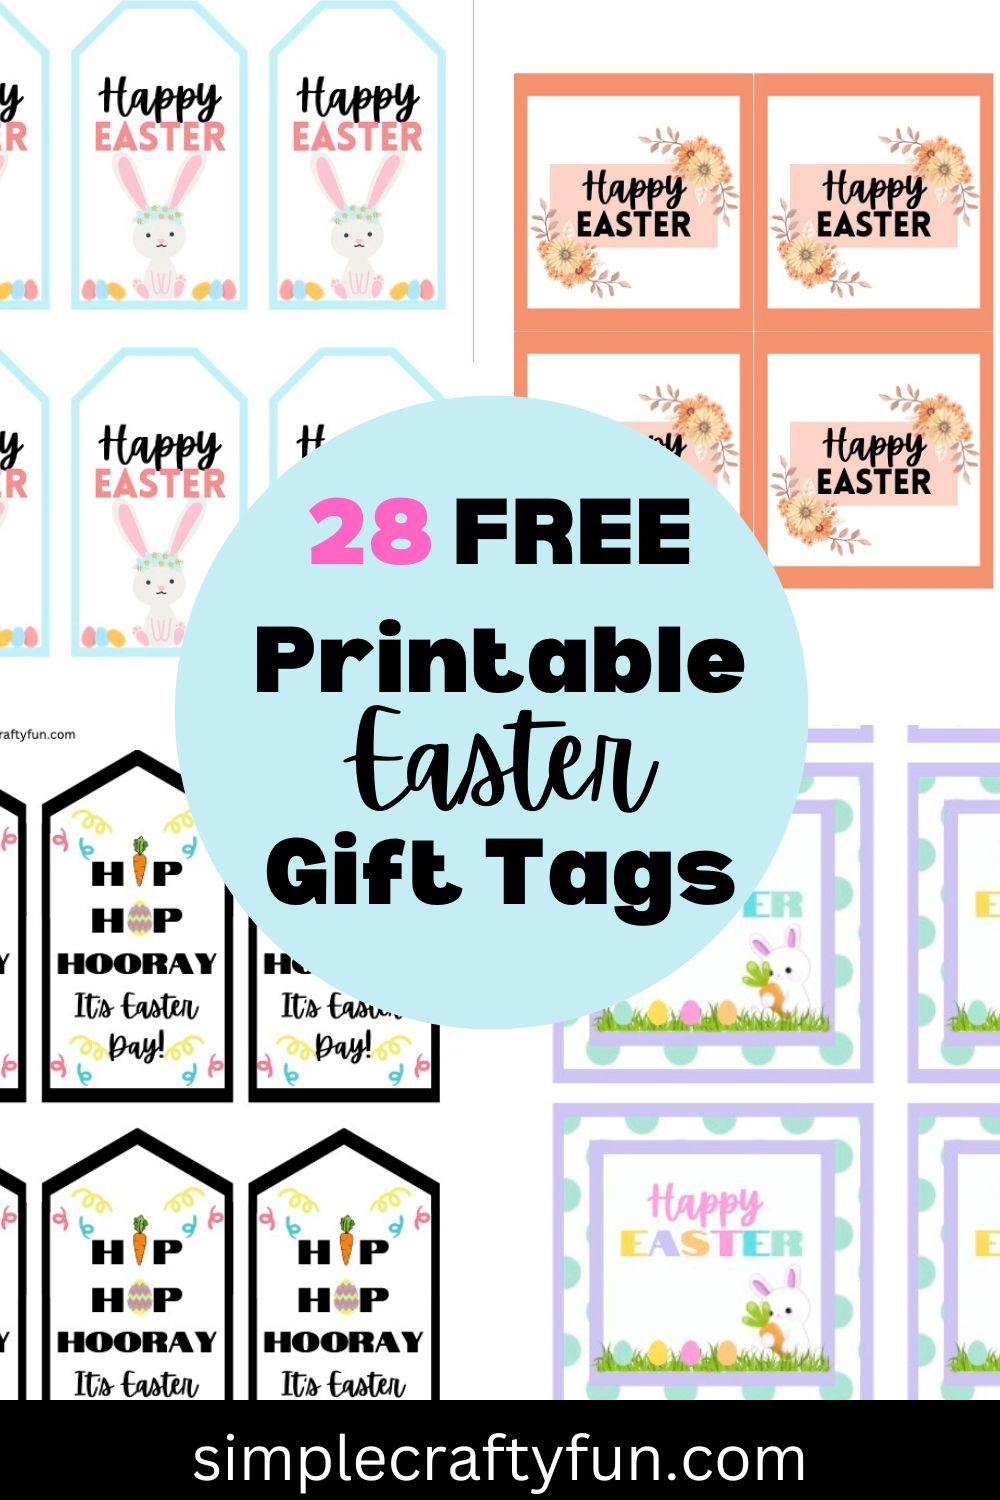 Free Printable Easter Tags for gifts